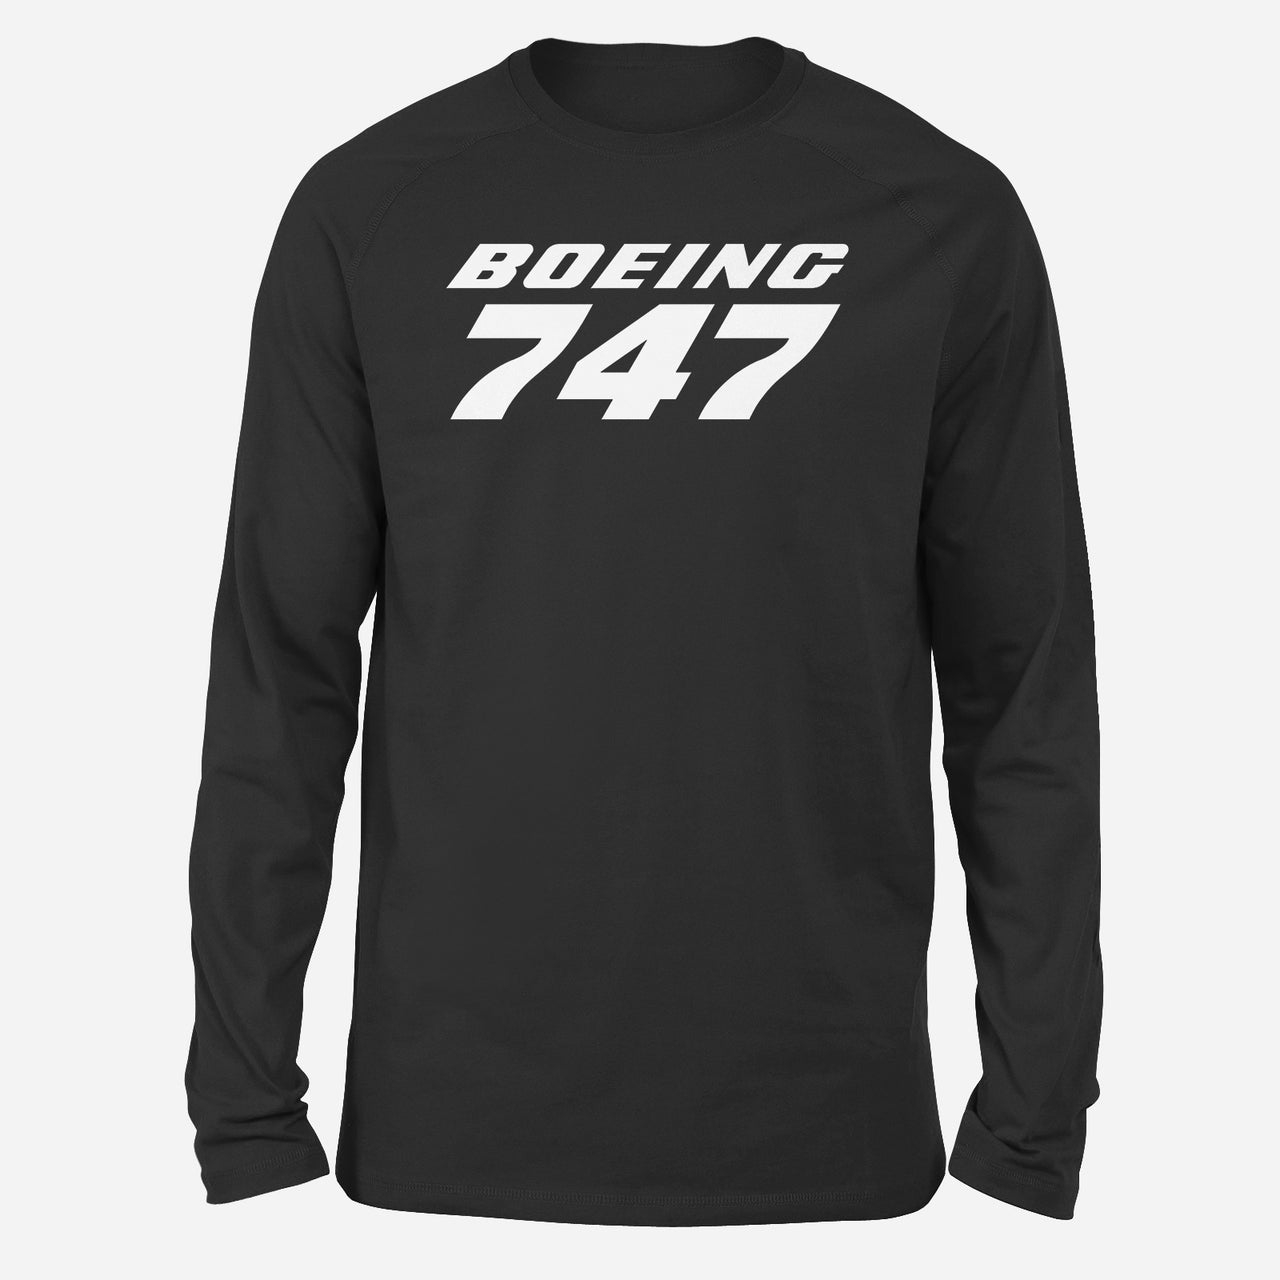 Boeing 747 & Text Designed Long-Sleeve T-Shirts